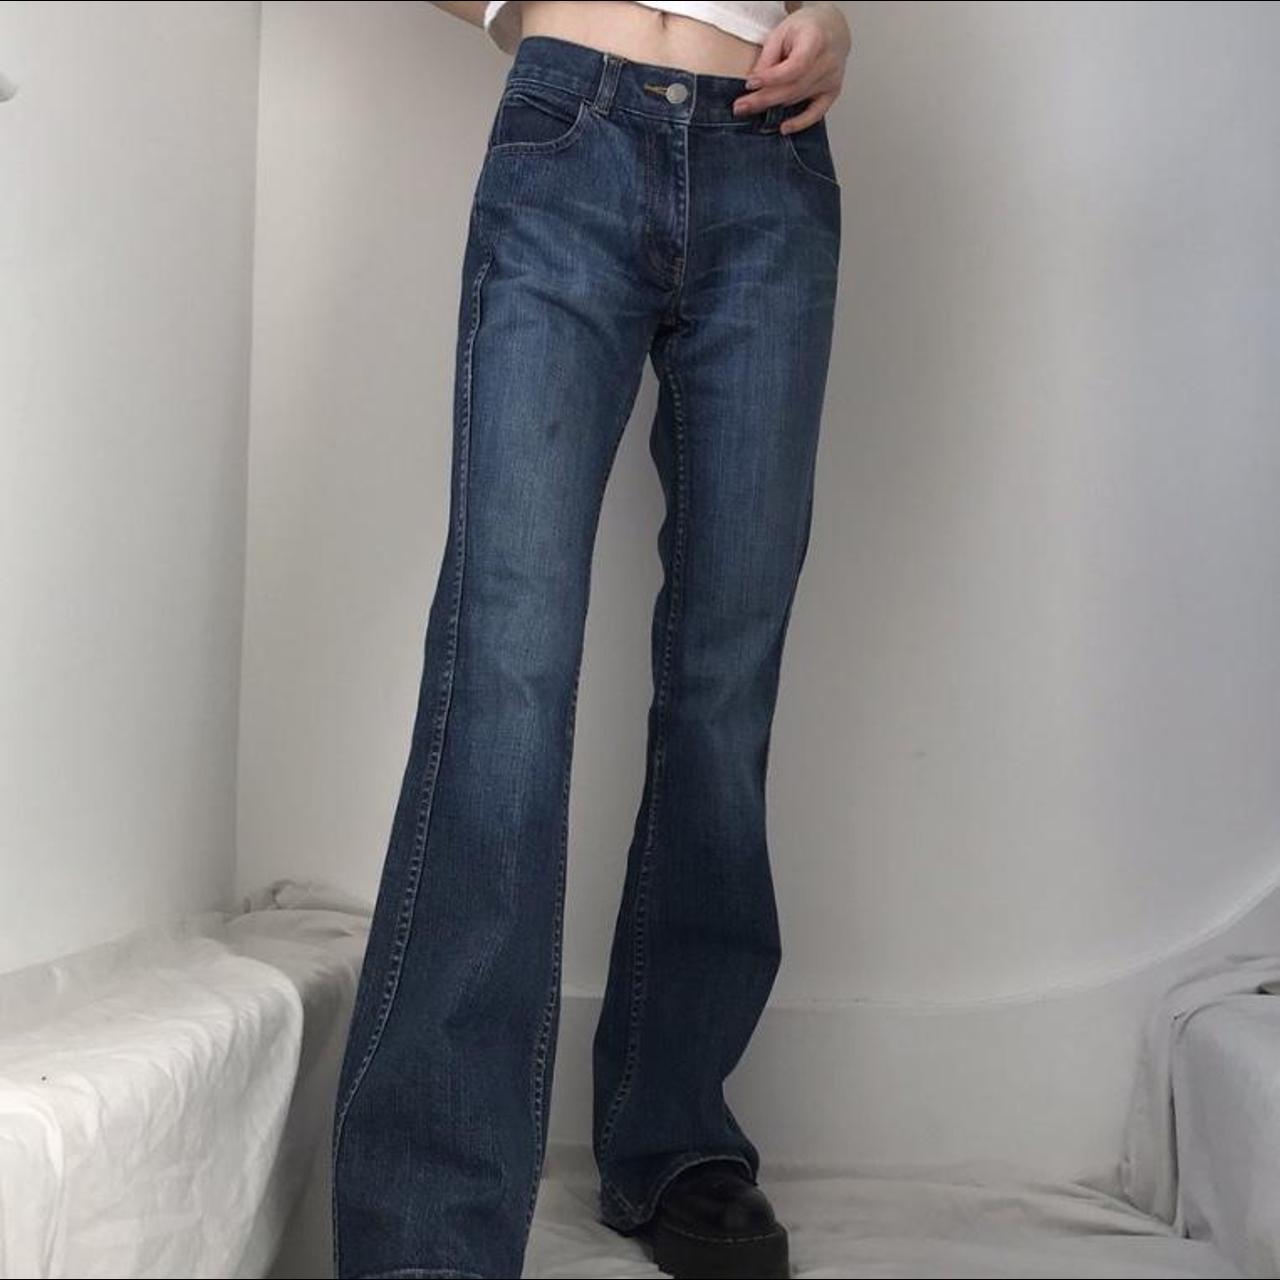 French Connection Women's Jeans | Depop